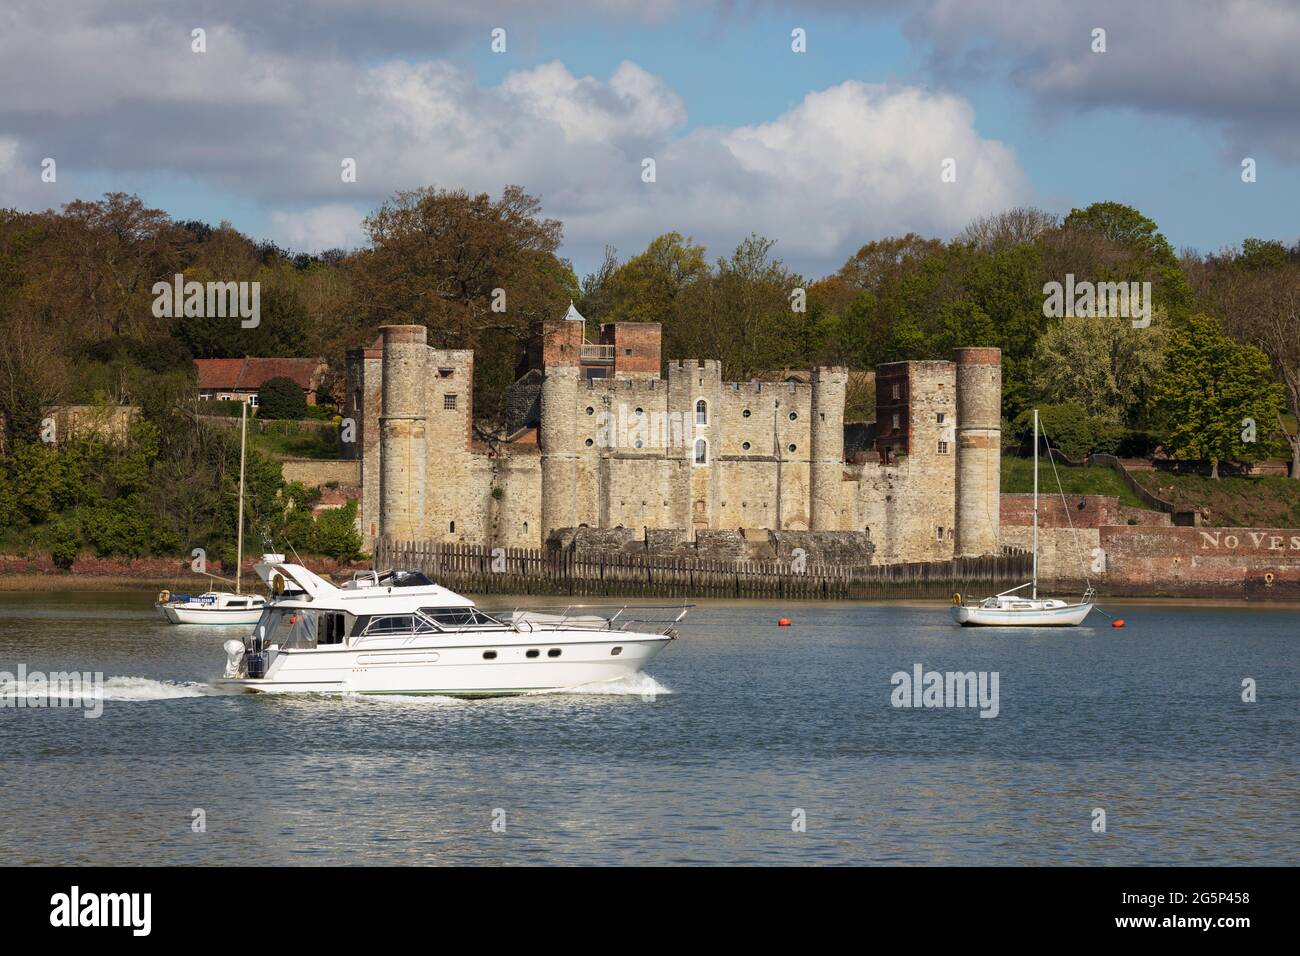 Upnor Castle on the west bank of the River Medway, Upnor, near Chatham, Kent, England, United Kingdom, Europe Stock Photo